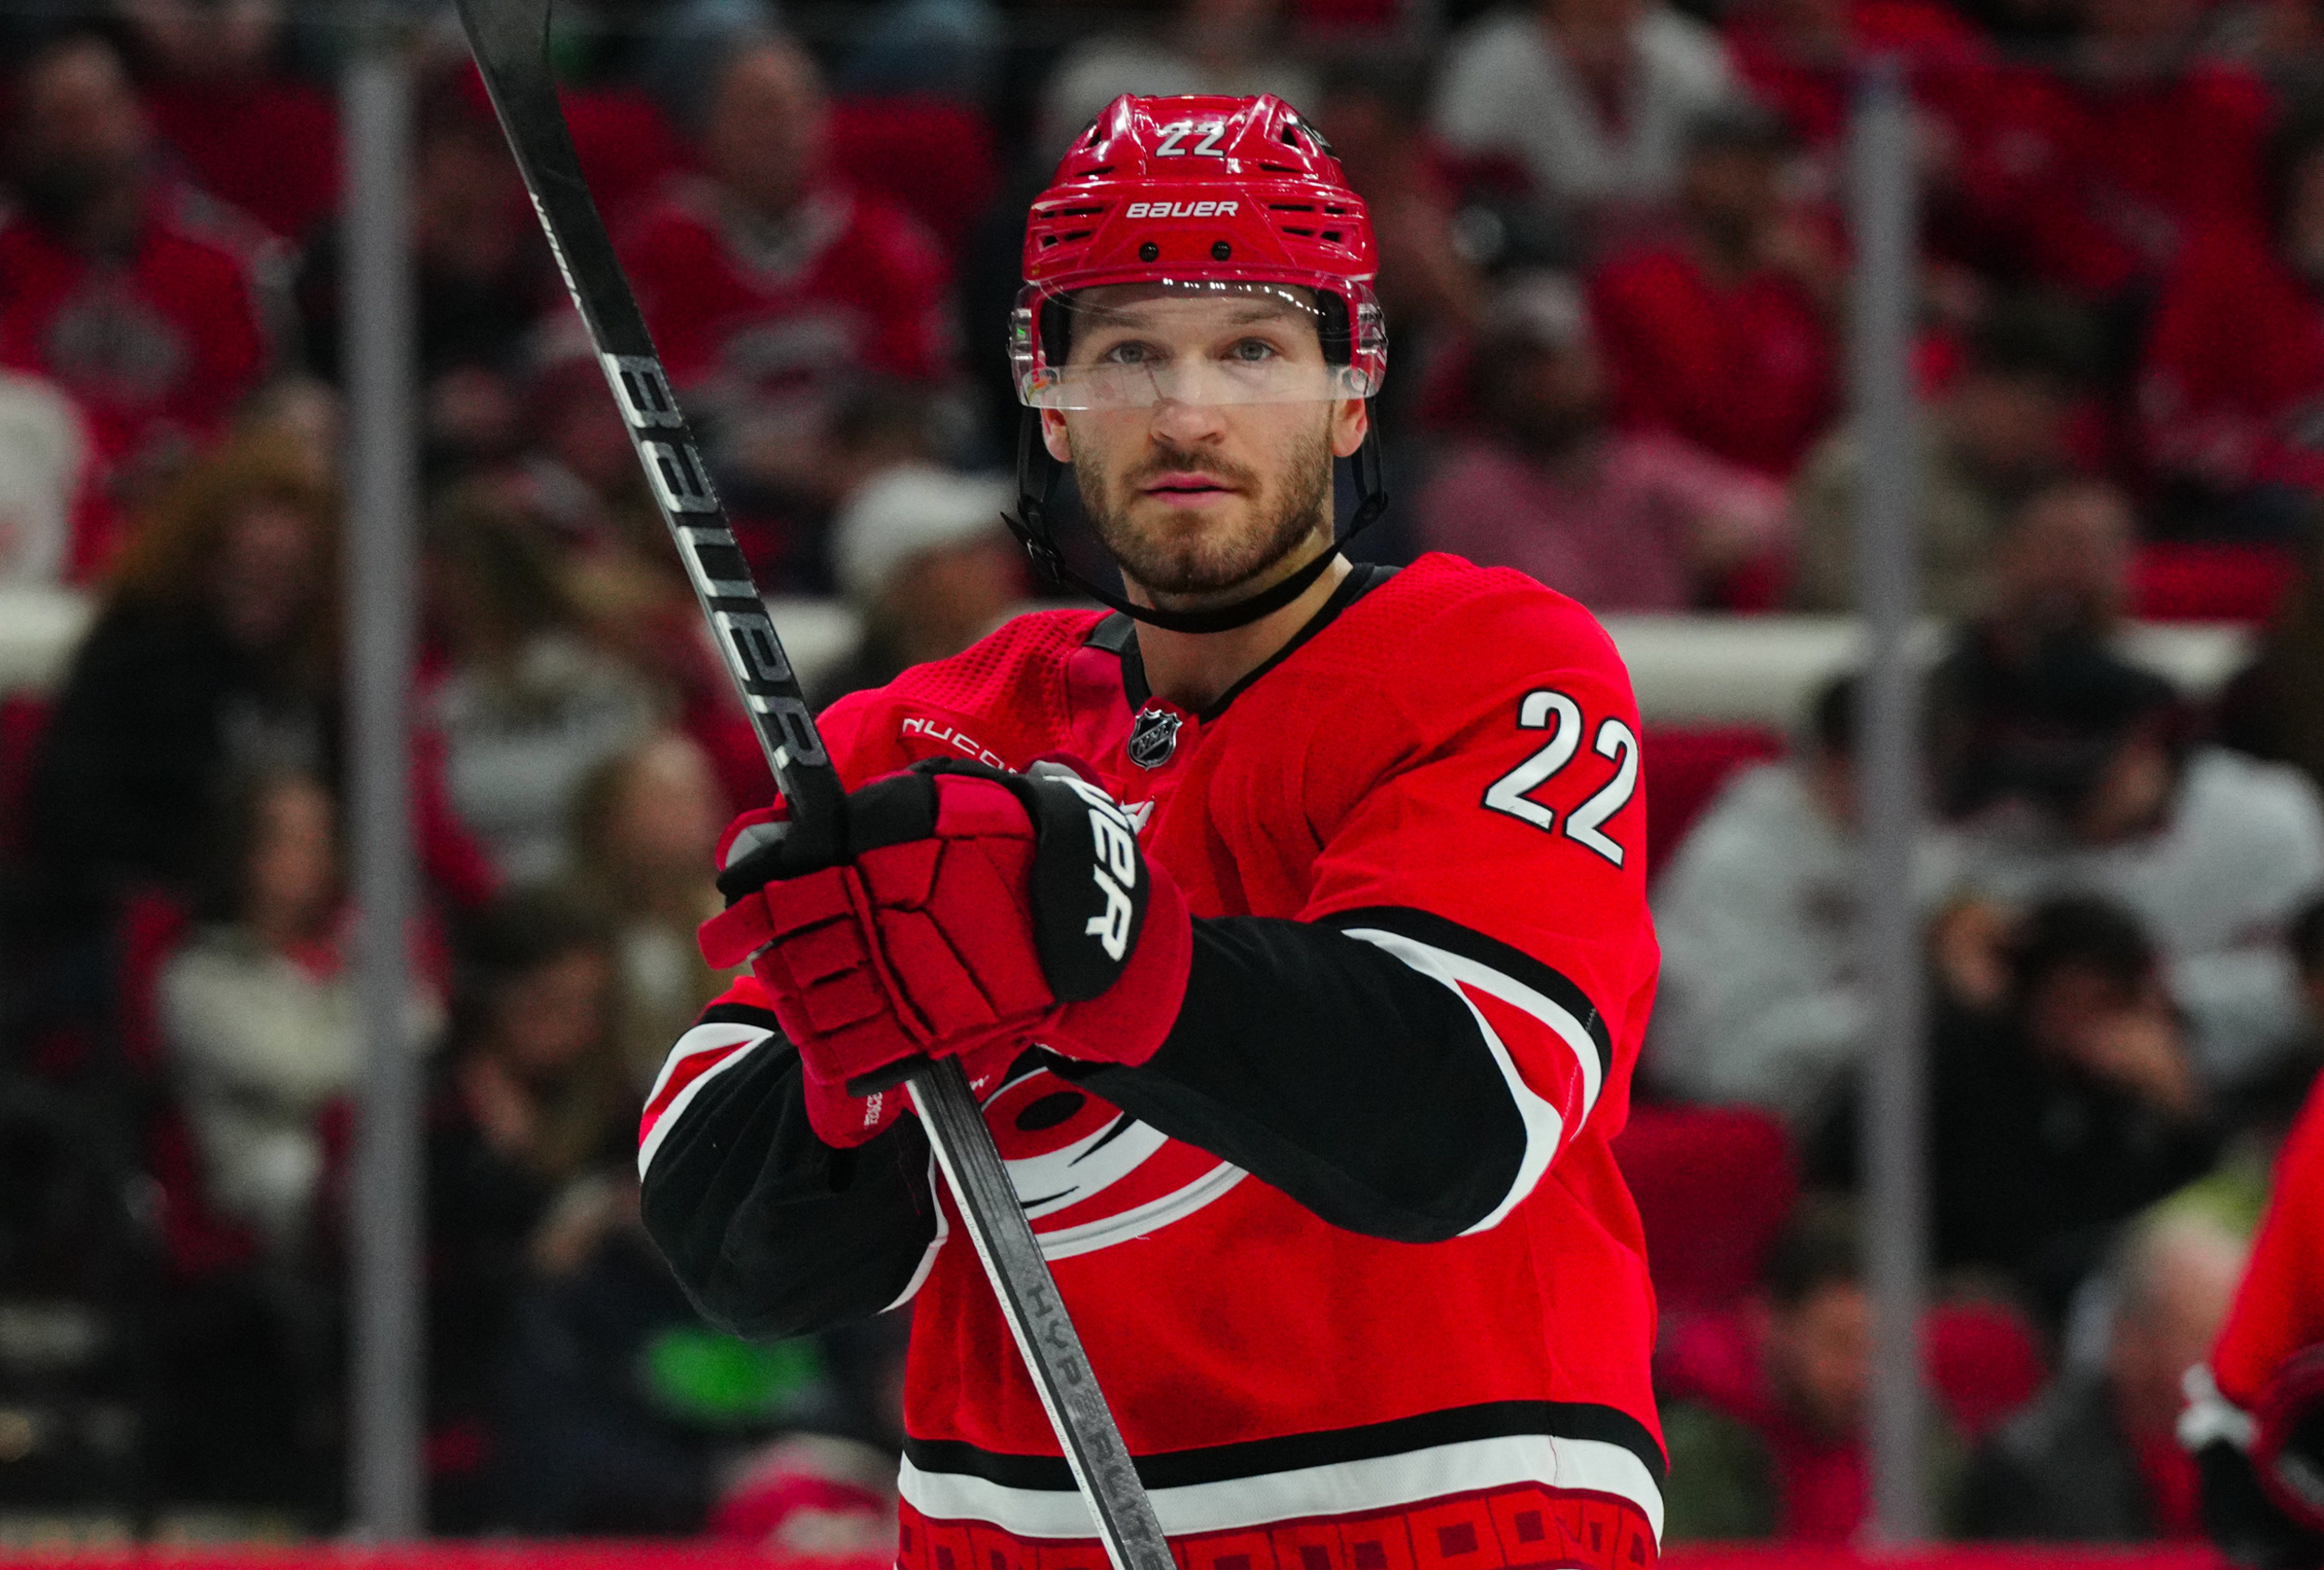 hurricanes likely to be without key defenseman for remainder of series against islanders